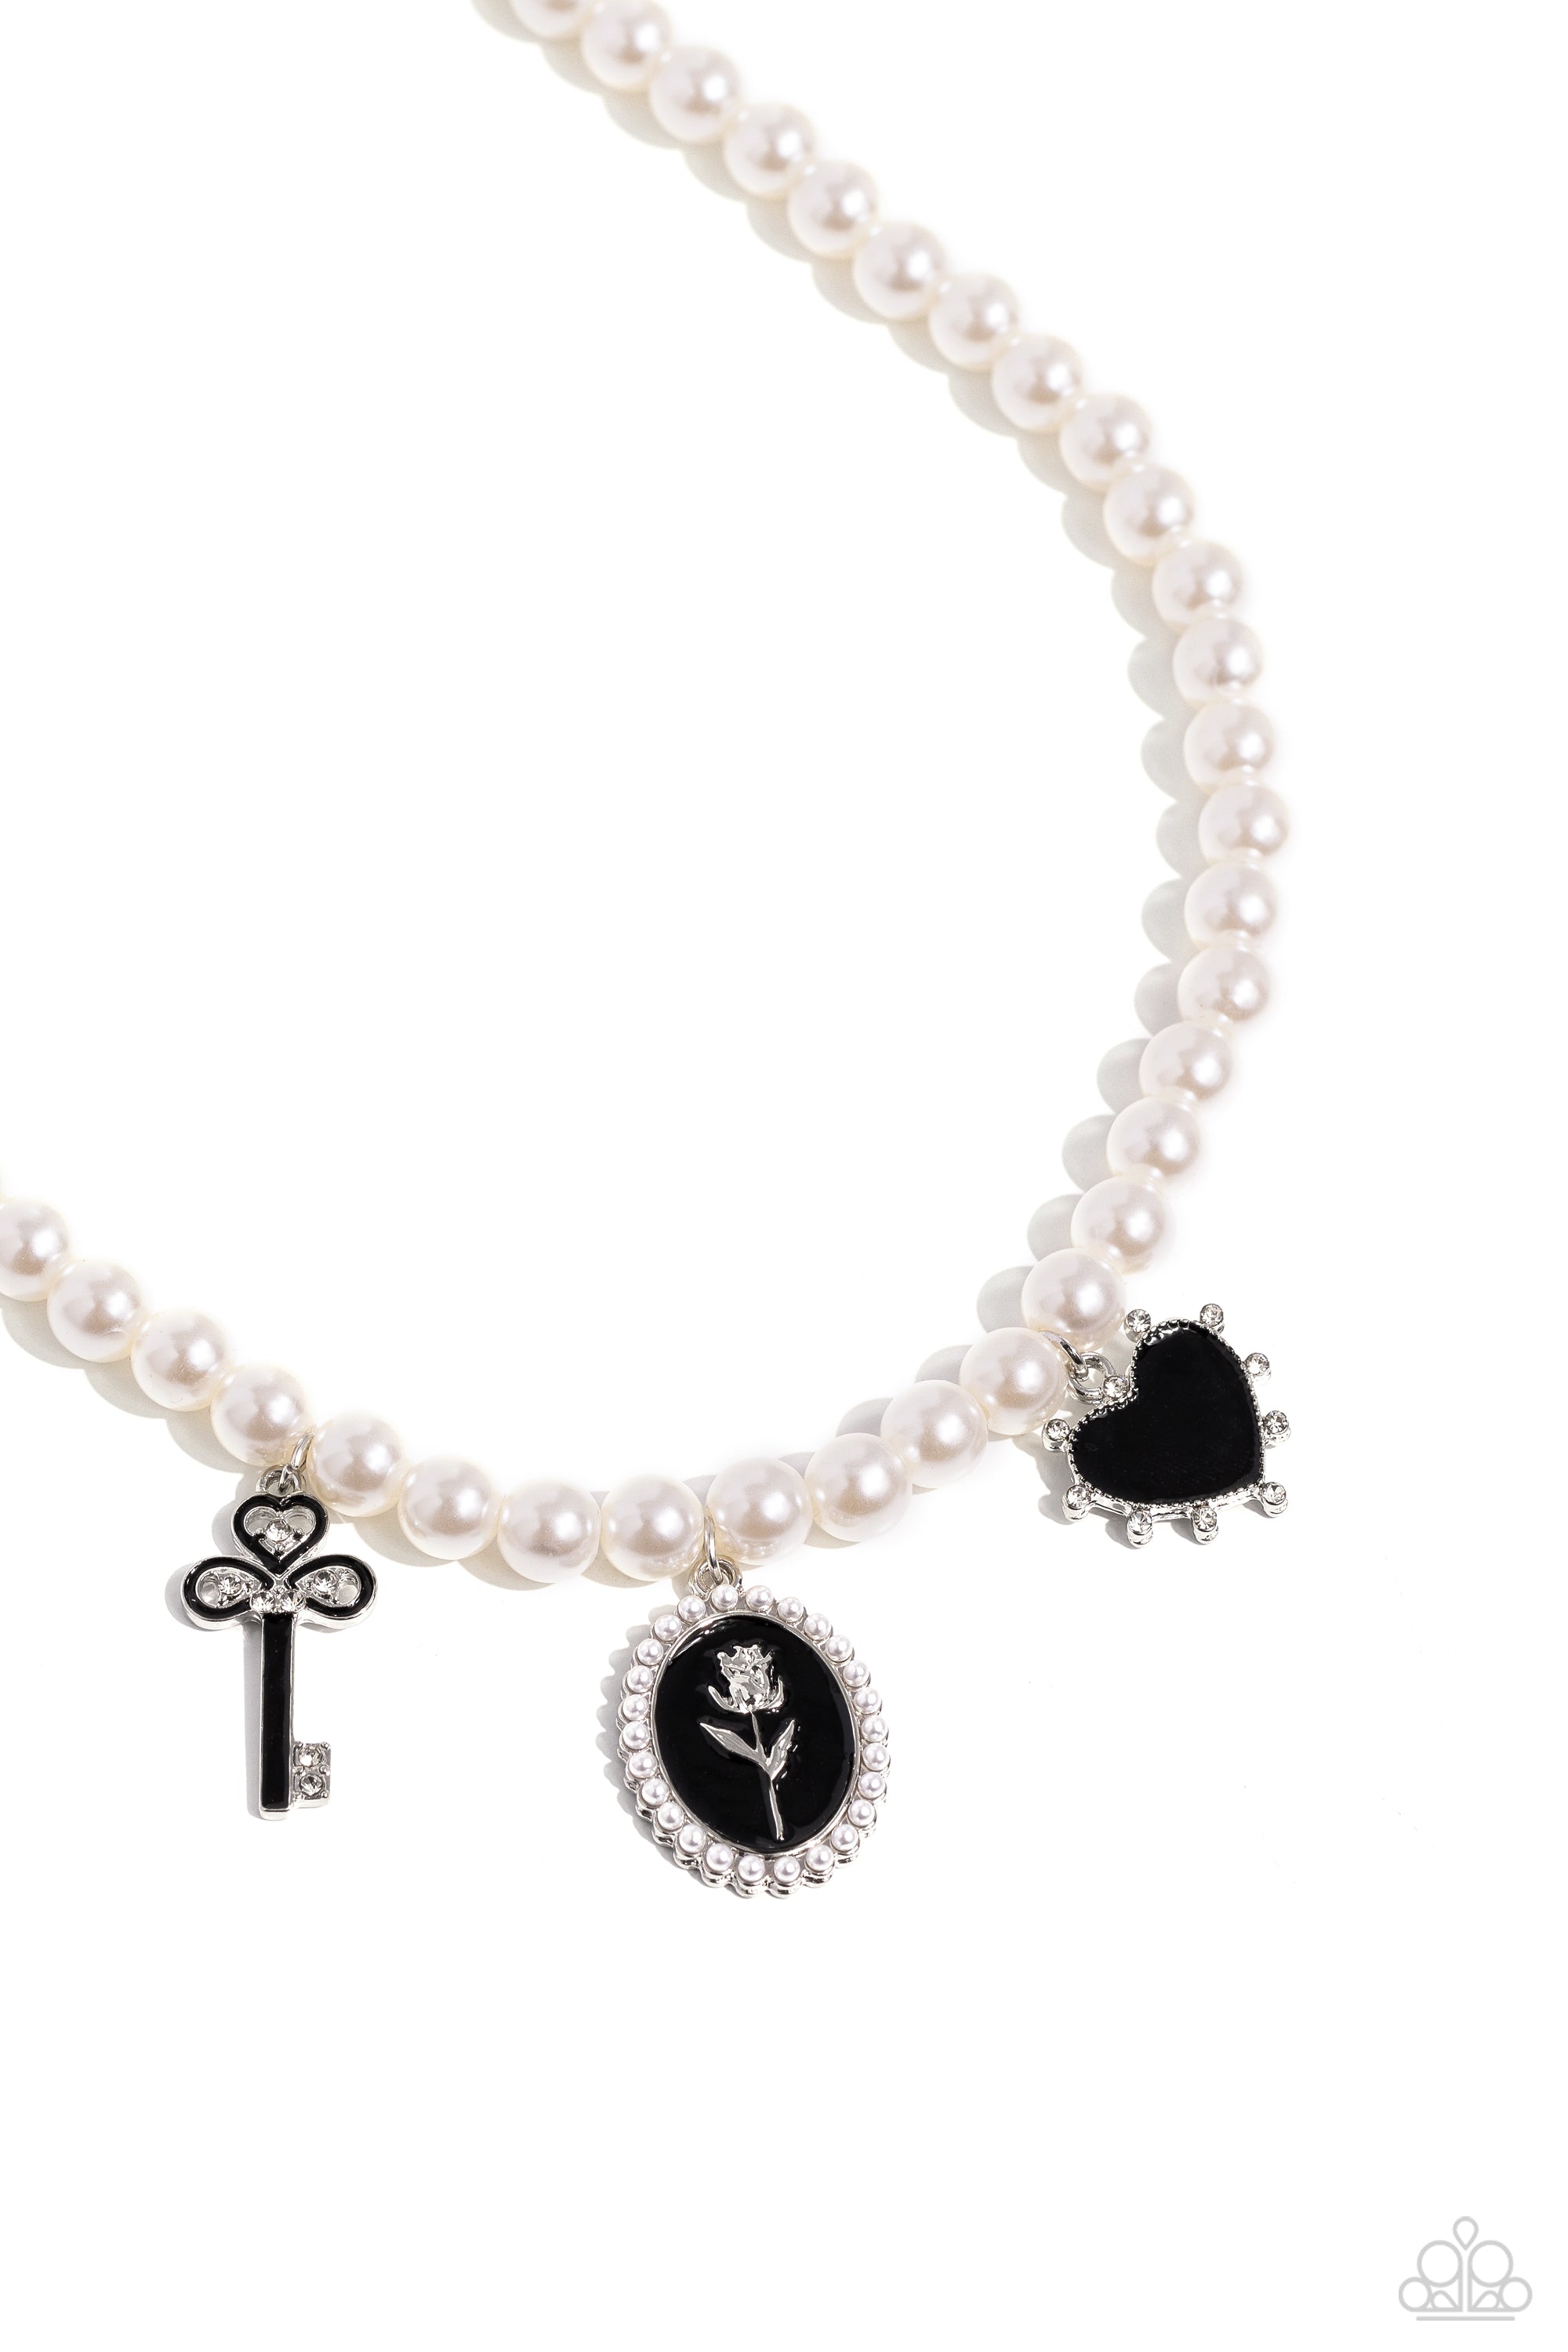 Charming Collision Black Charm & White Pearl Necklace - Paparazzi Accessories- lightbox - CarasShop.com - $5 Jewelry by Cara Jewels